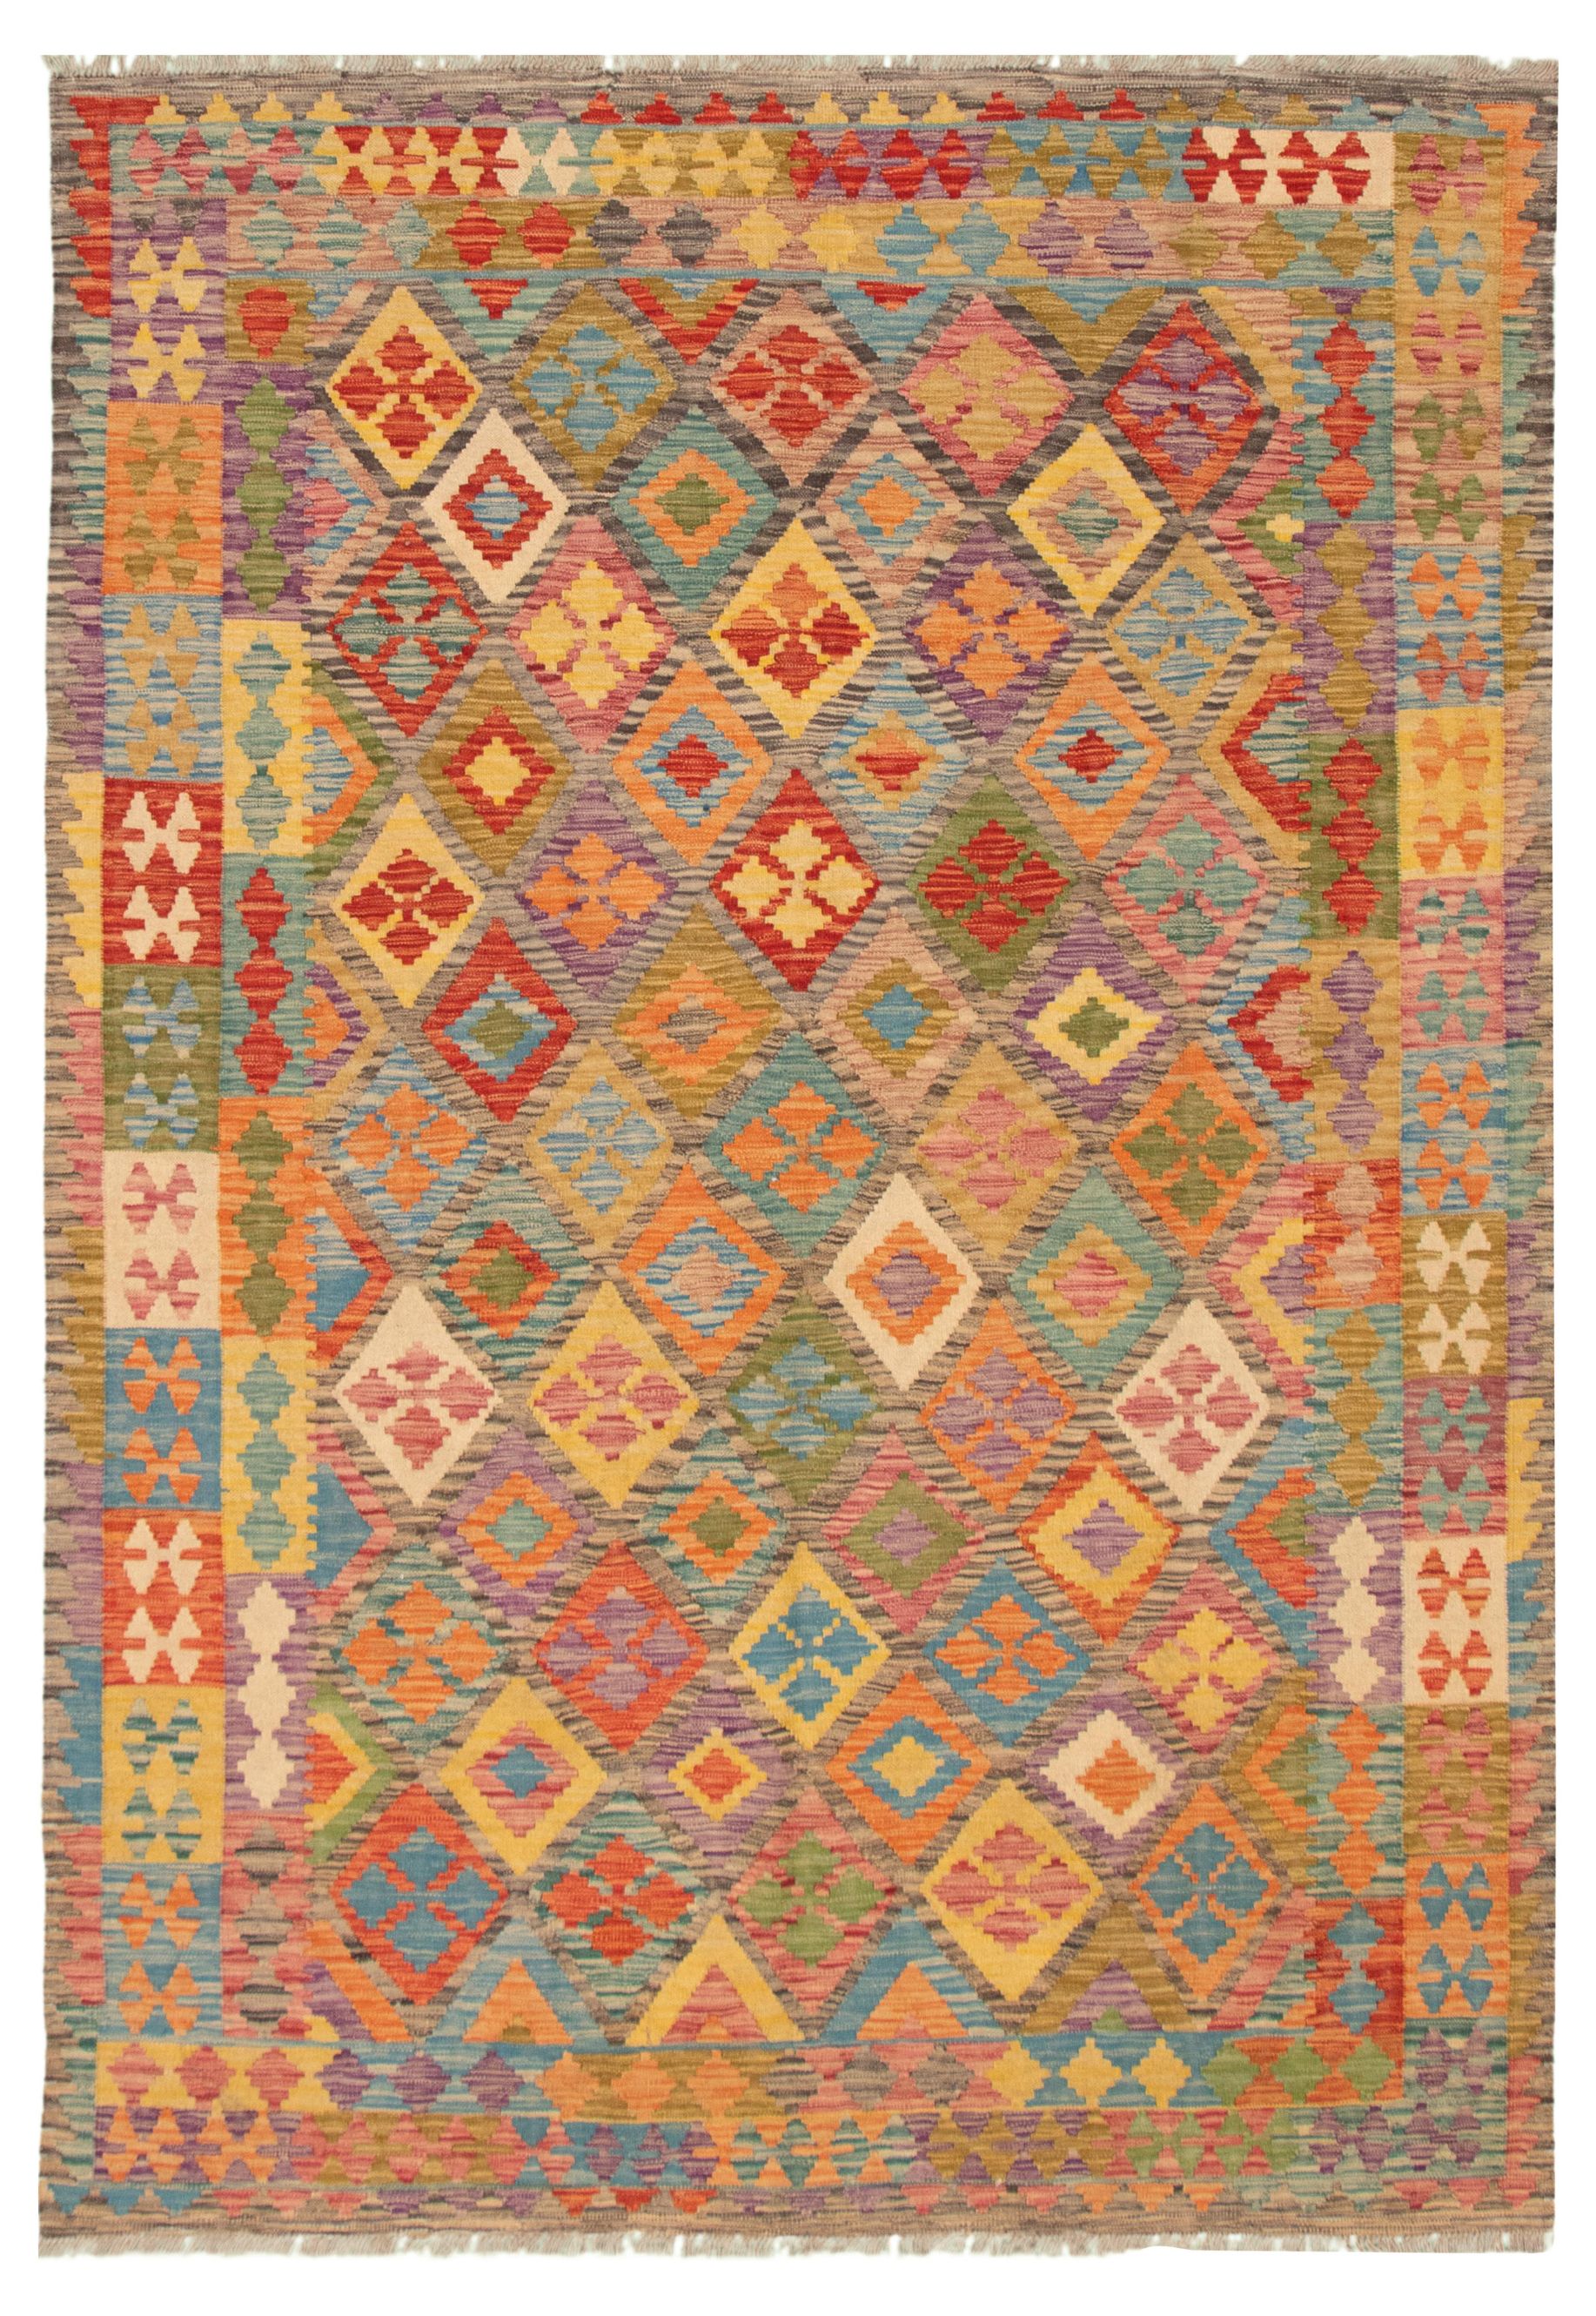 Hand woven Bold and Colorful  Multi Color Wool Kilim 6'6" x 9'8" Size: 6'6" x 9'8"  